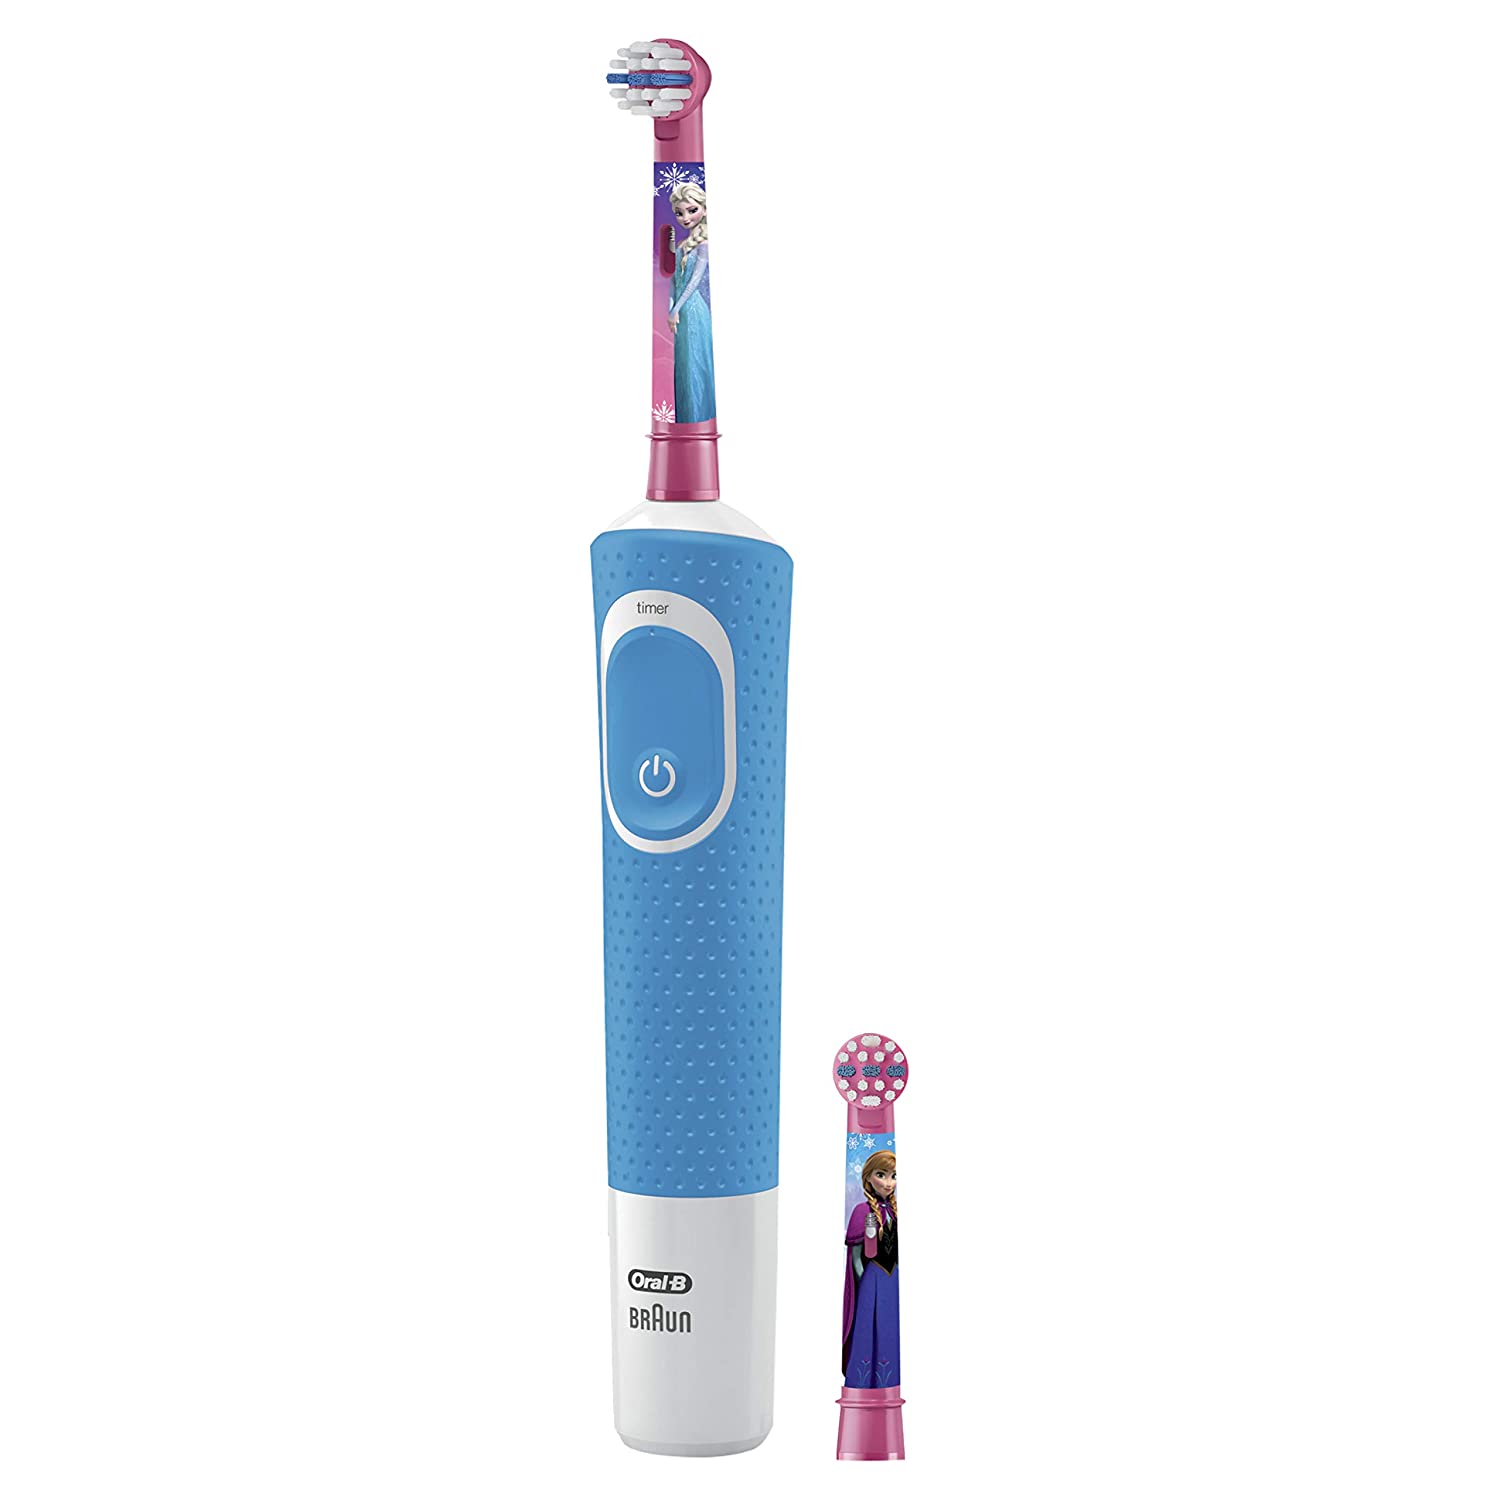 Oral-B Kids Electric Rechargeable Power Toothbrush Featuring Disney's Frozen